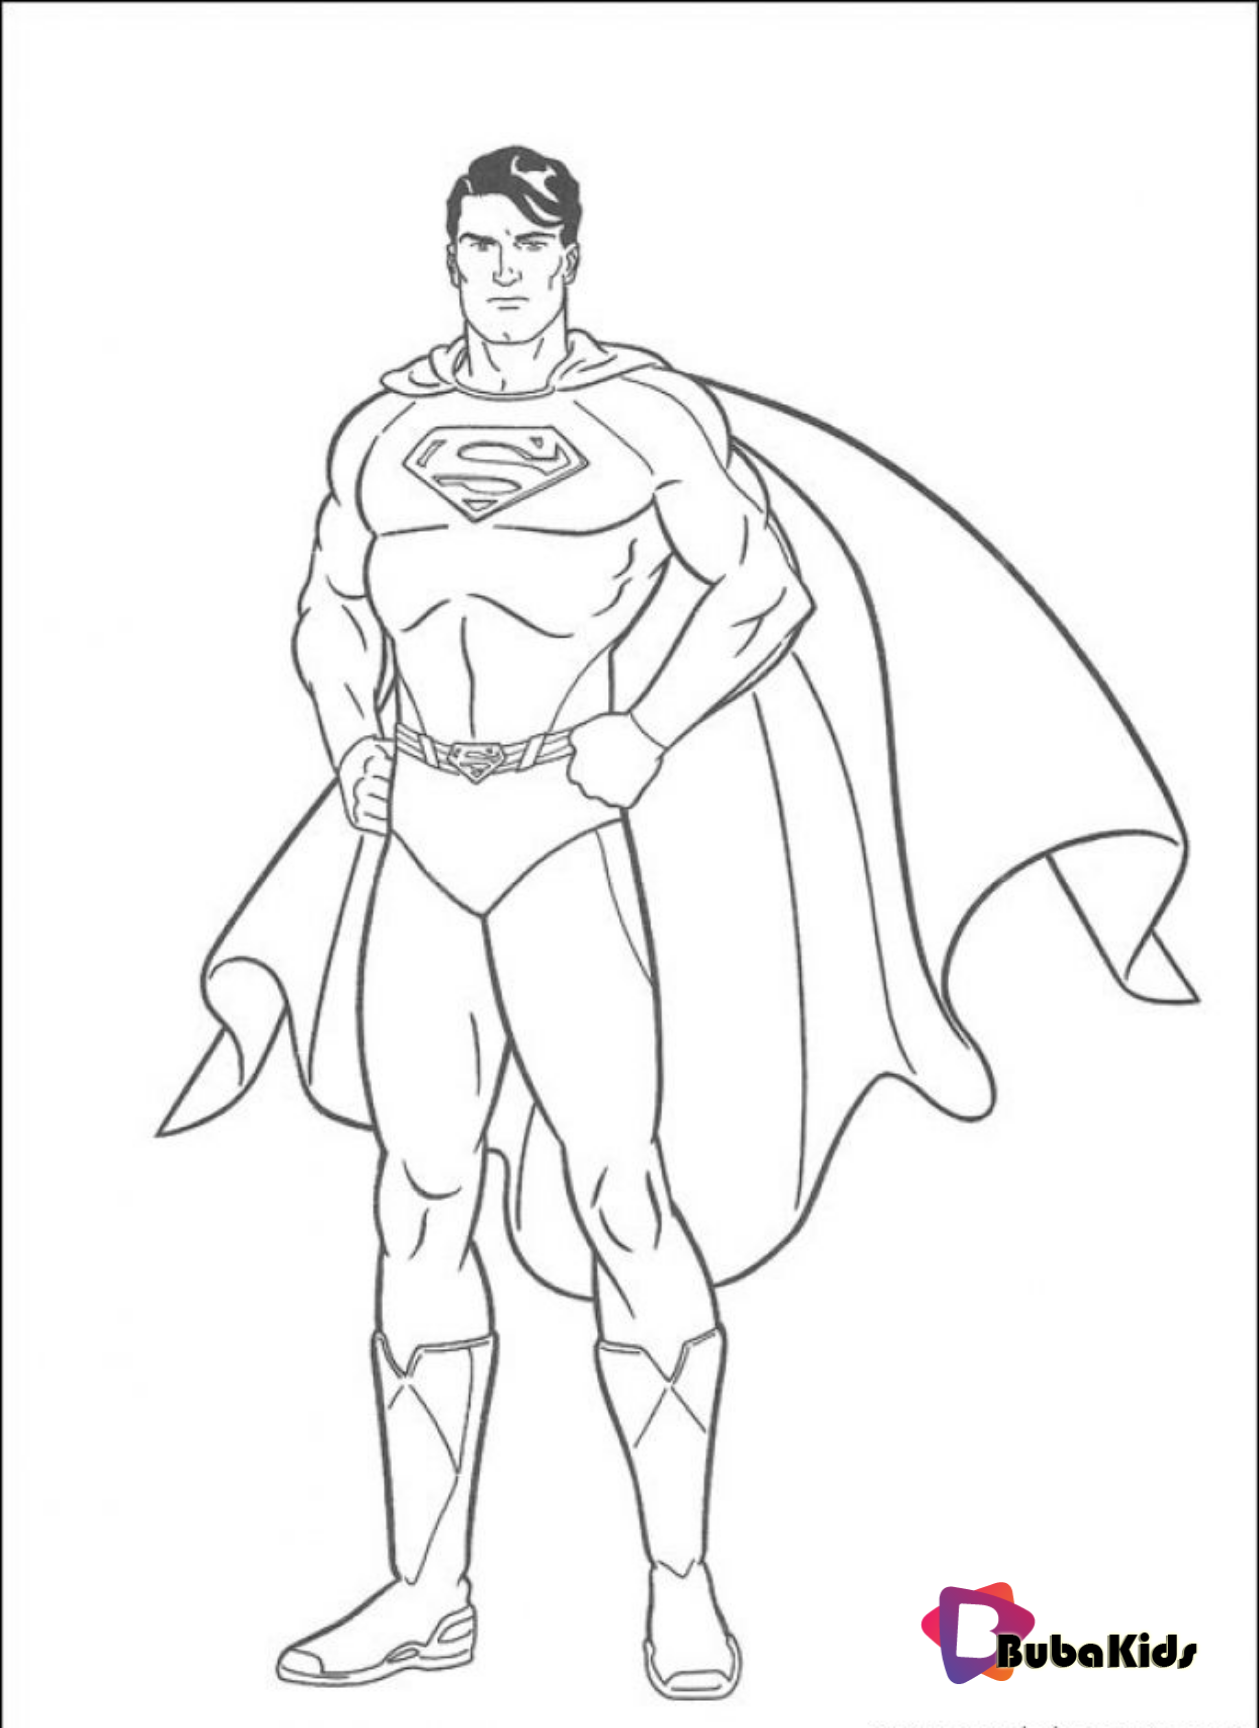 Printable Superman Coloring Pages on bubakids.com Wallpaper